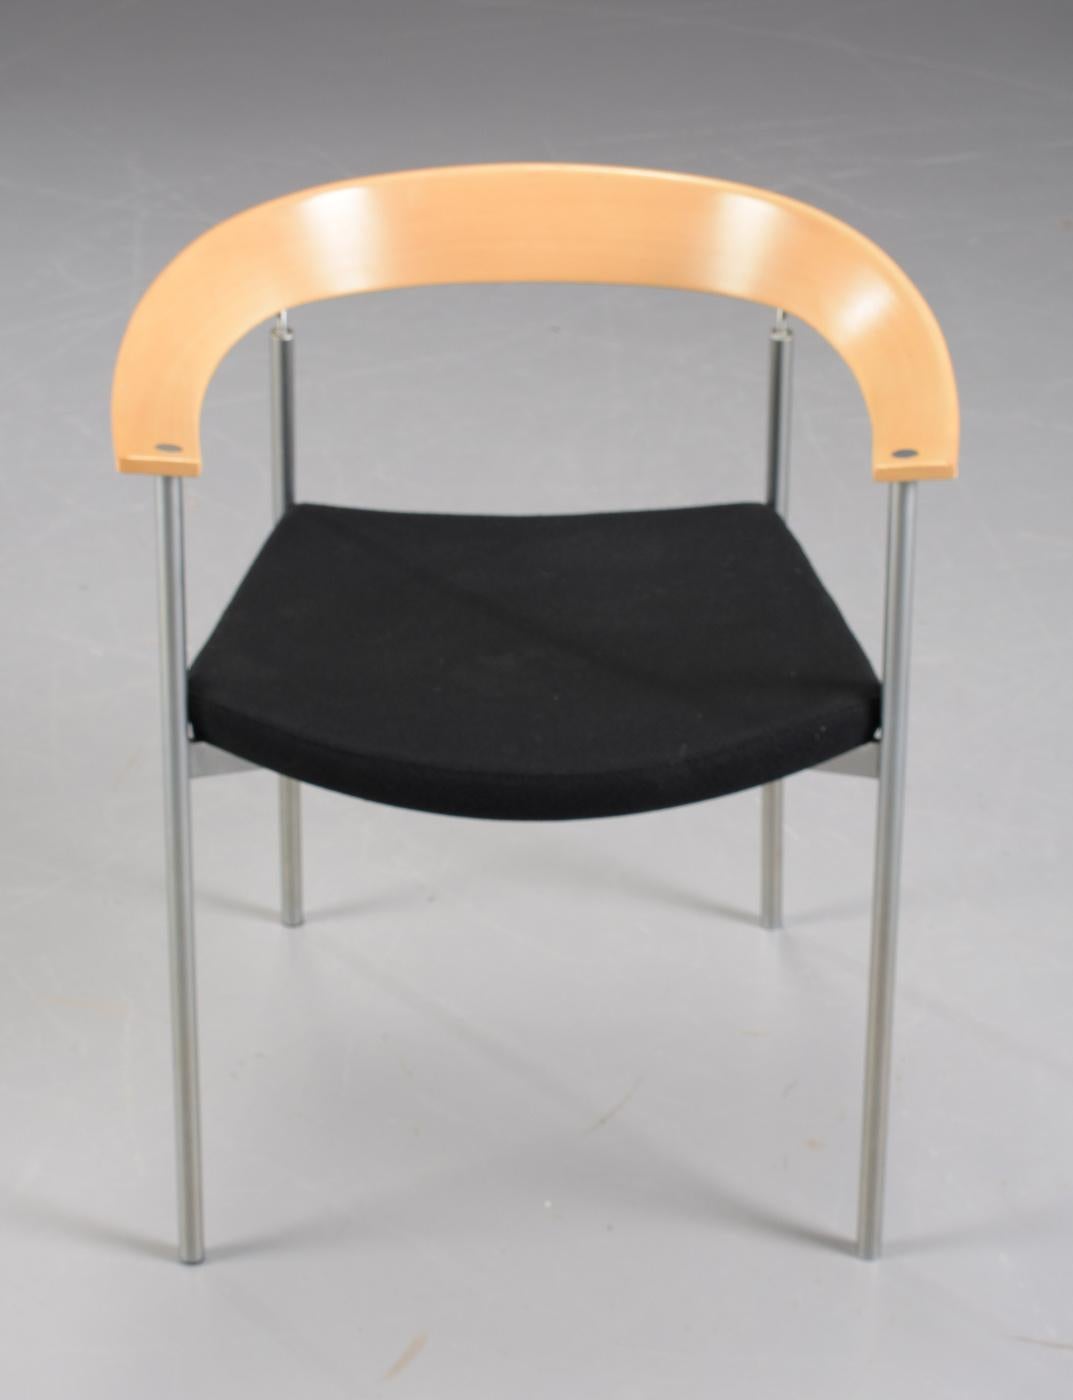 Danish stackable Johannes Foersom armchairs designed in 1998 in tube steel, beech, chrome and black leather made by Paustian.

The chairs feature elegant organic round shaped arm- and backrest in beech and frame in tube steel and chrome